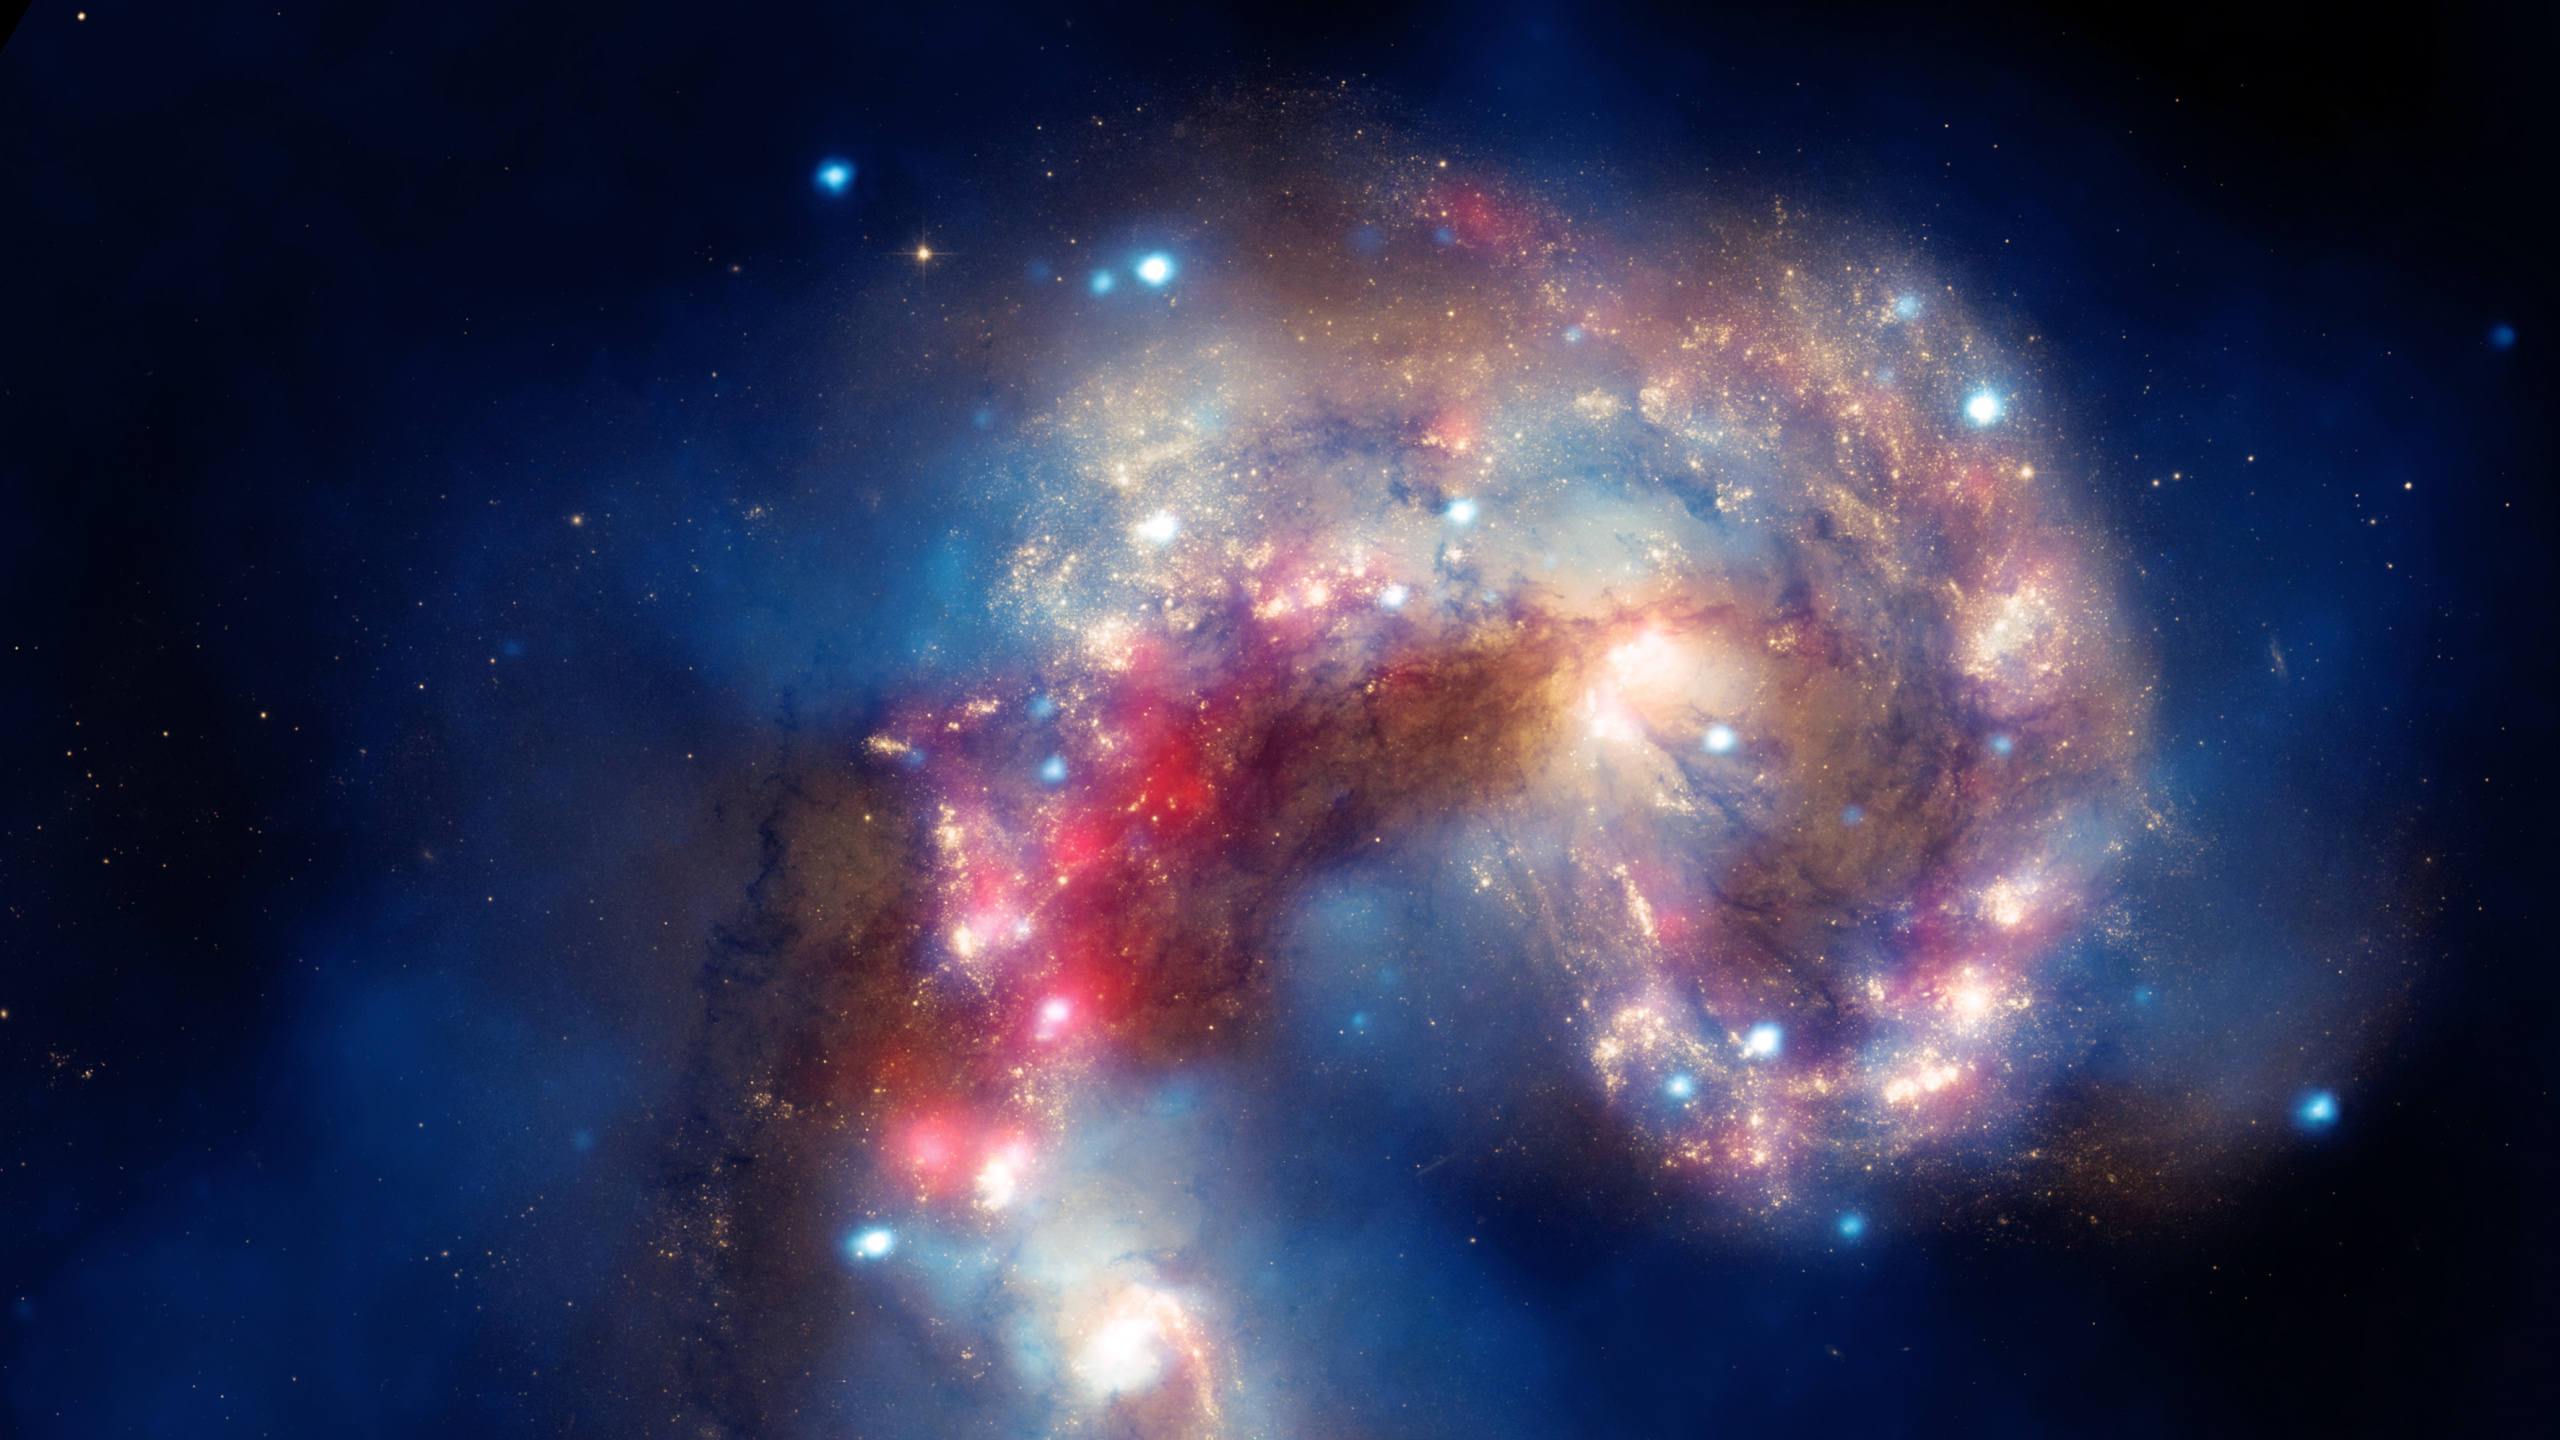 Blue and Red Galaxy Illustration. Wallpaper in 2560x1440 Resolution